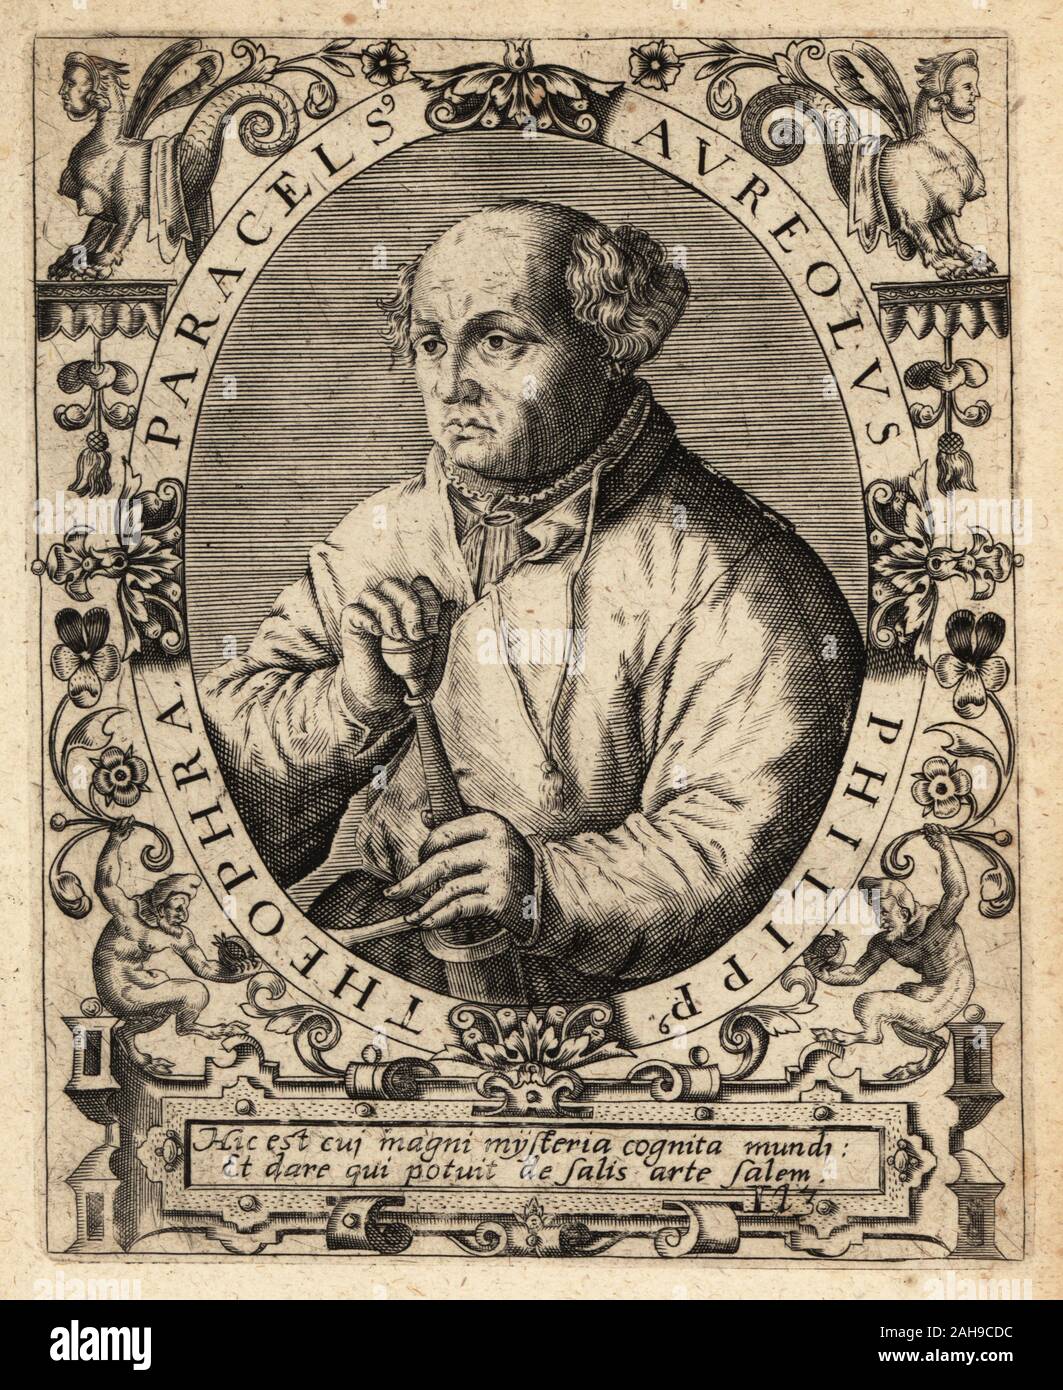 Paracelsus, Swiss physician, alchemist and astrologer, 1494-1541. Paracelsus Aureolus Philippus Theophra. Copperplate engraving by Johann Theodore de Bry from Jean-Jacques Boissard’s Bibliotheca Chalcographica, Johann Ammonius, Frankfurt, 1650. Stock Photo